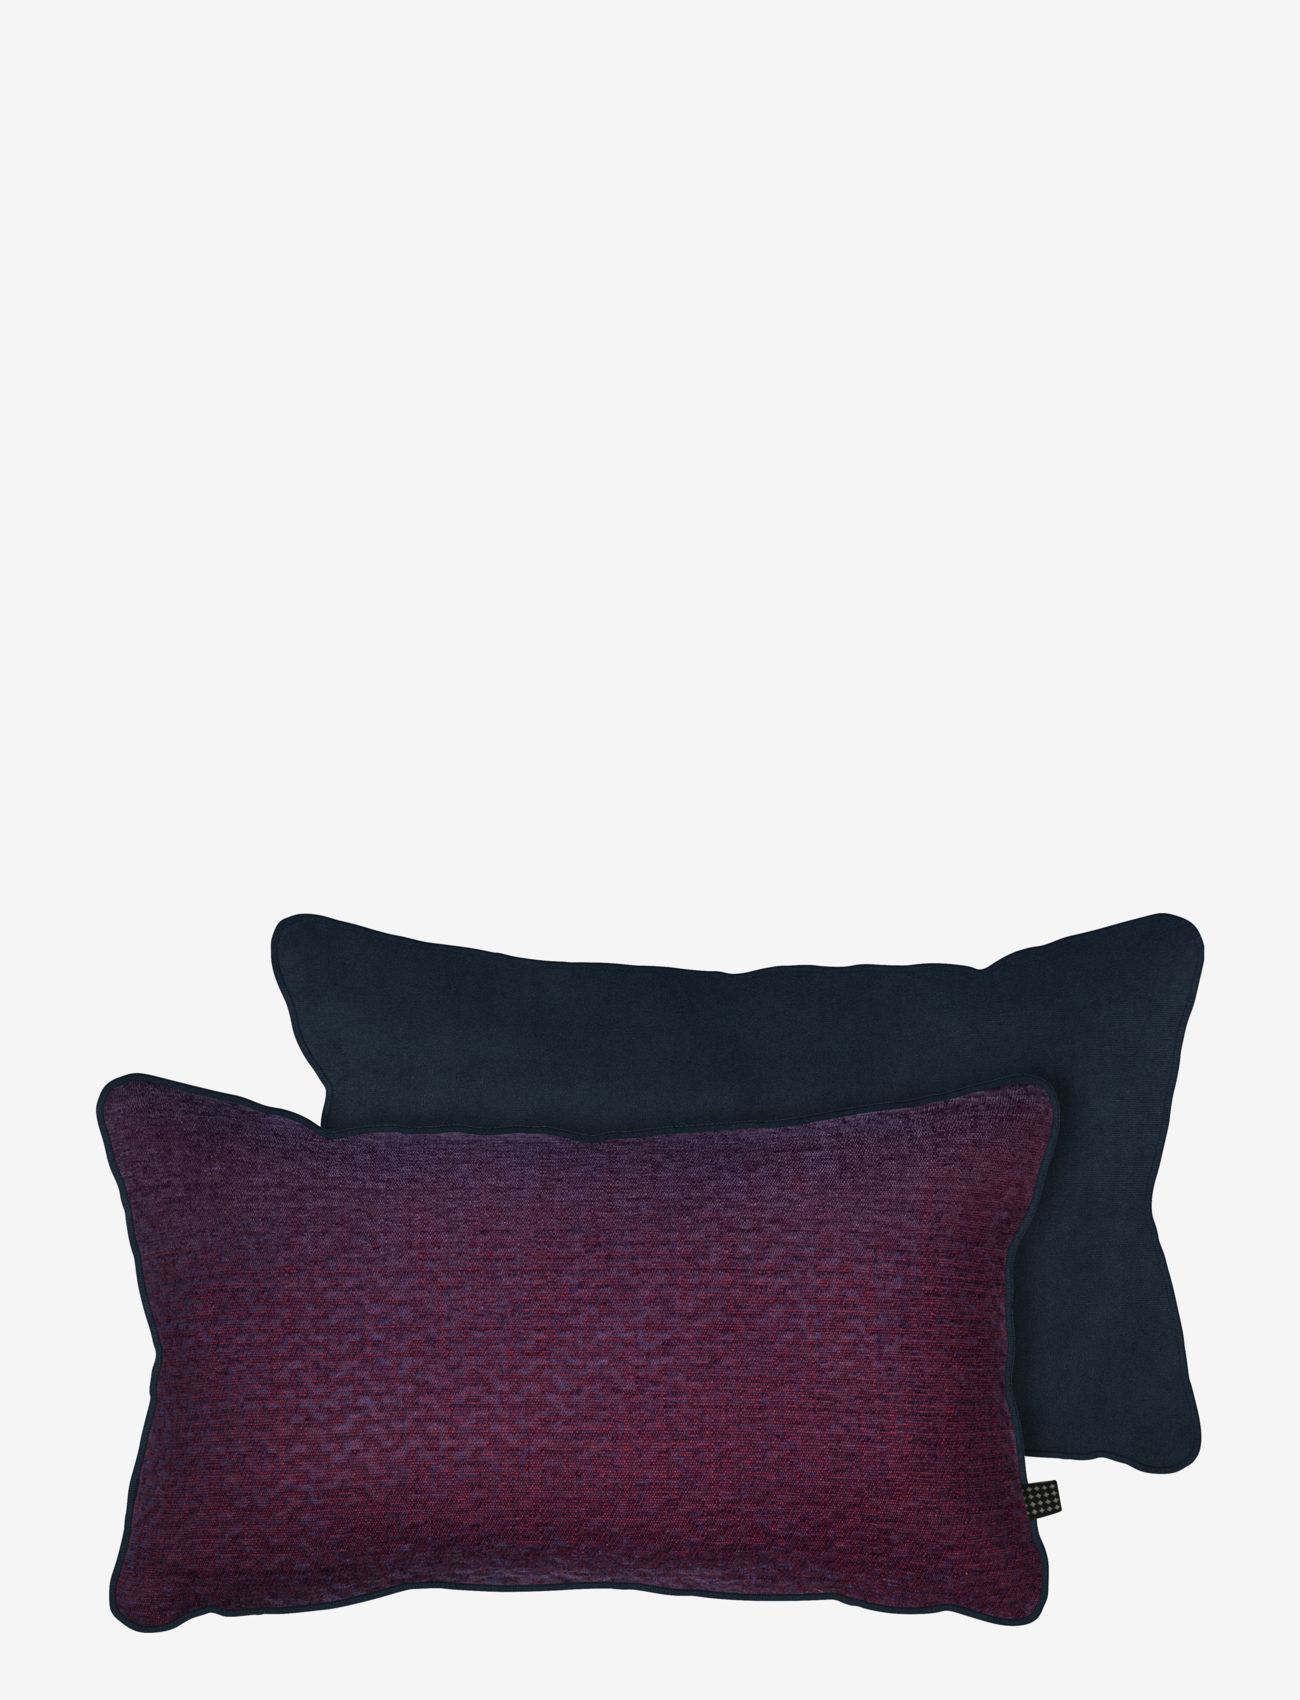 Mette Ditmer - ATELIER cushion, with filling - cushions - aubergine - 0